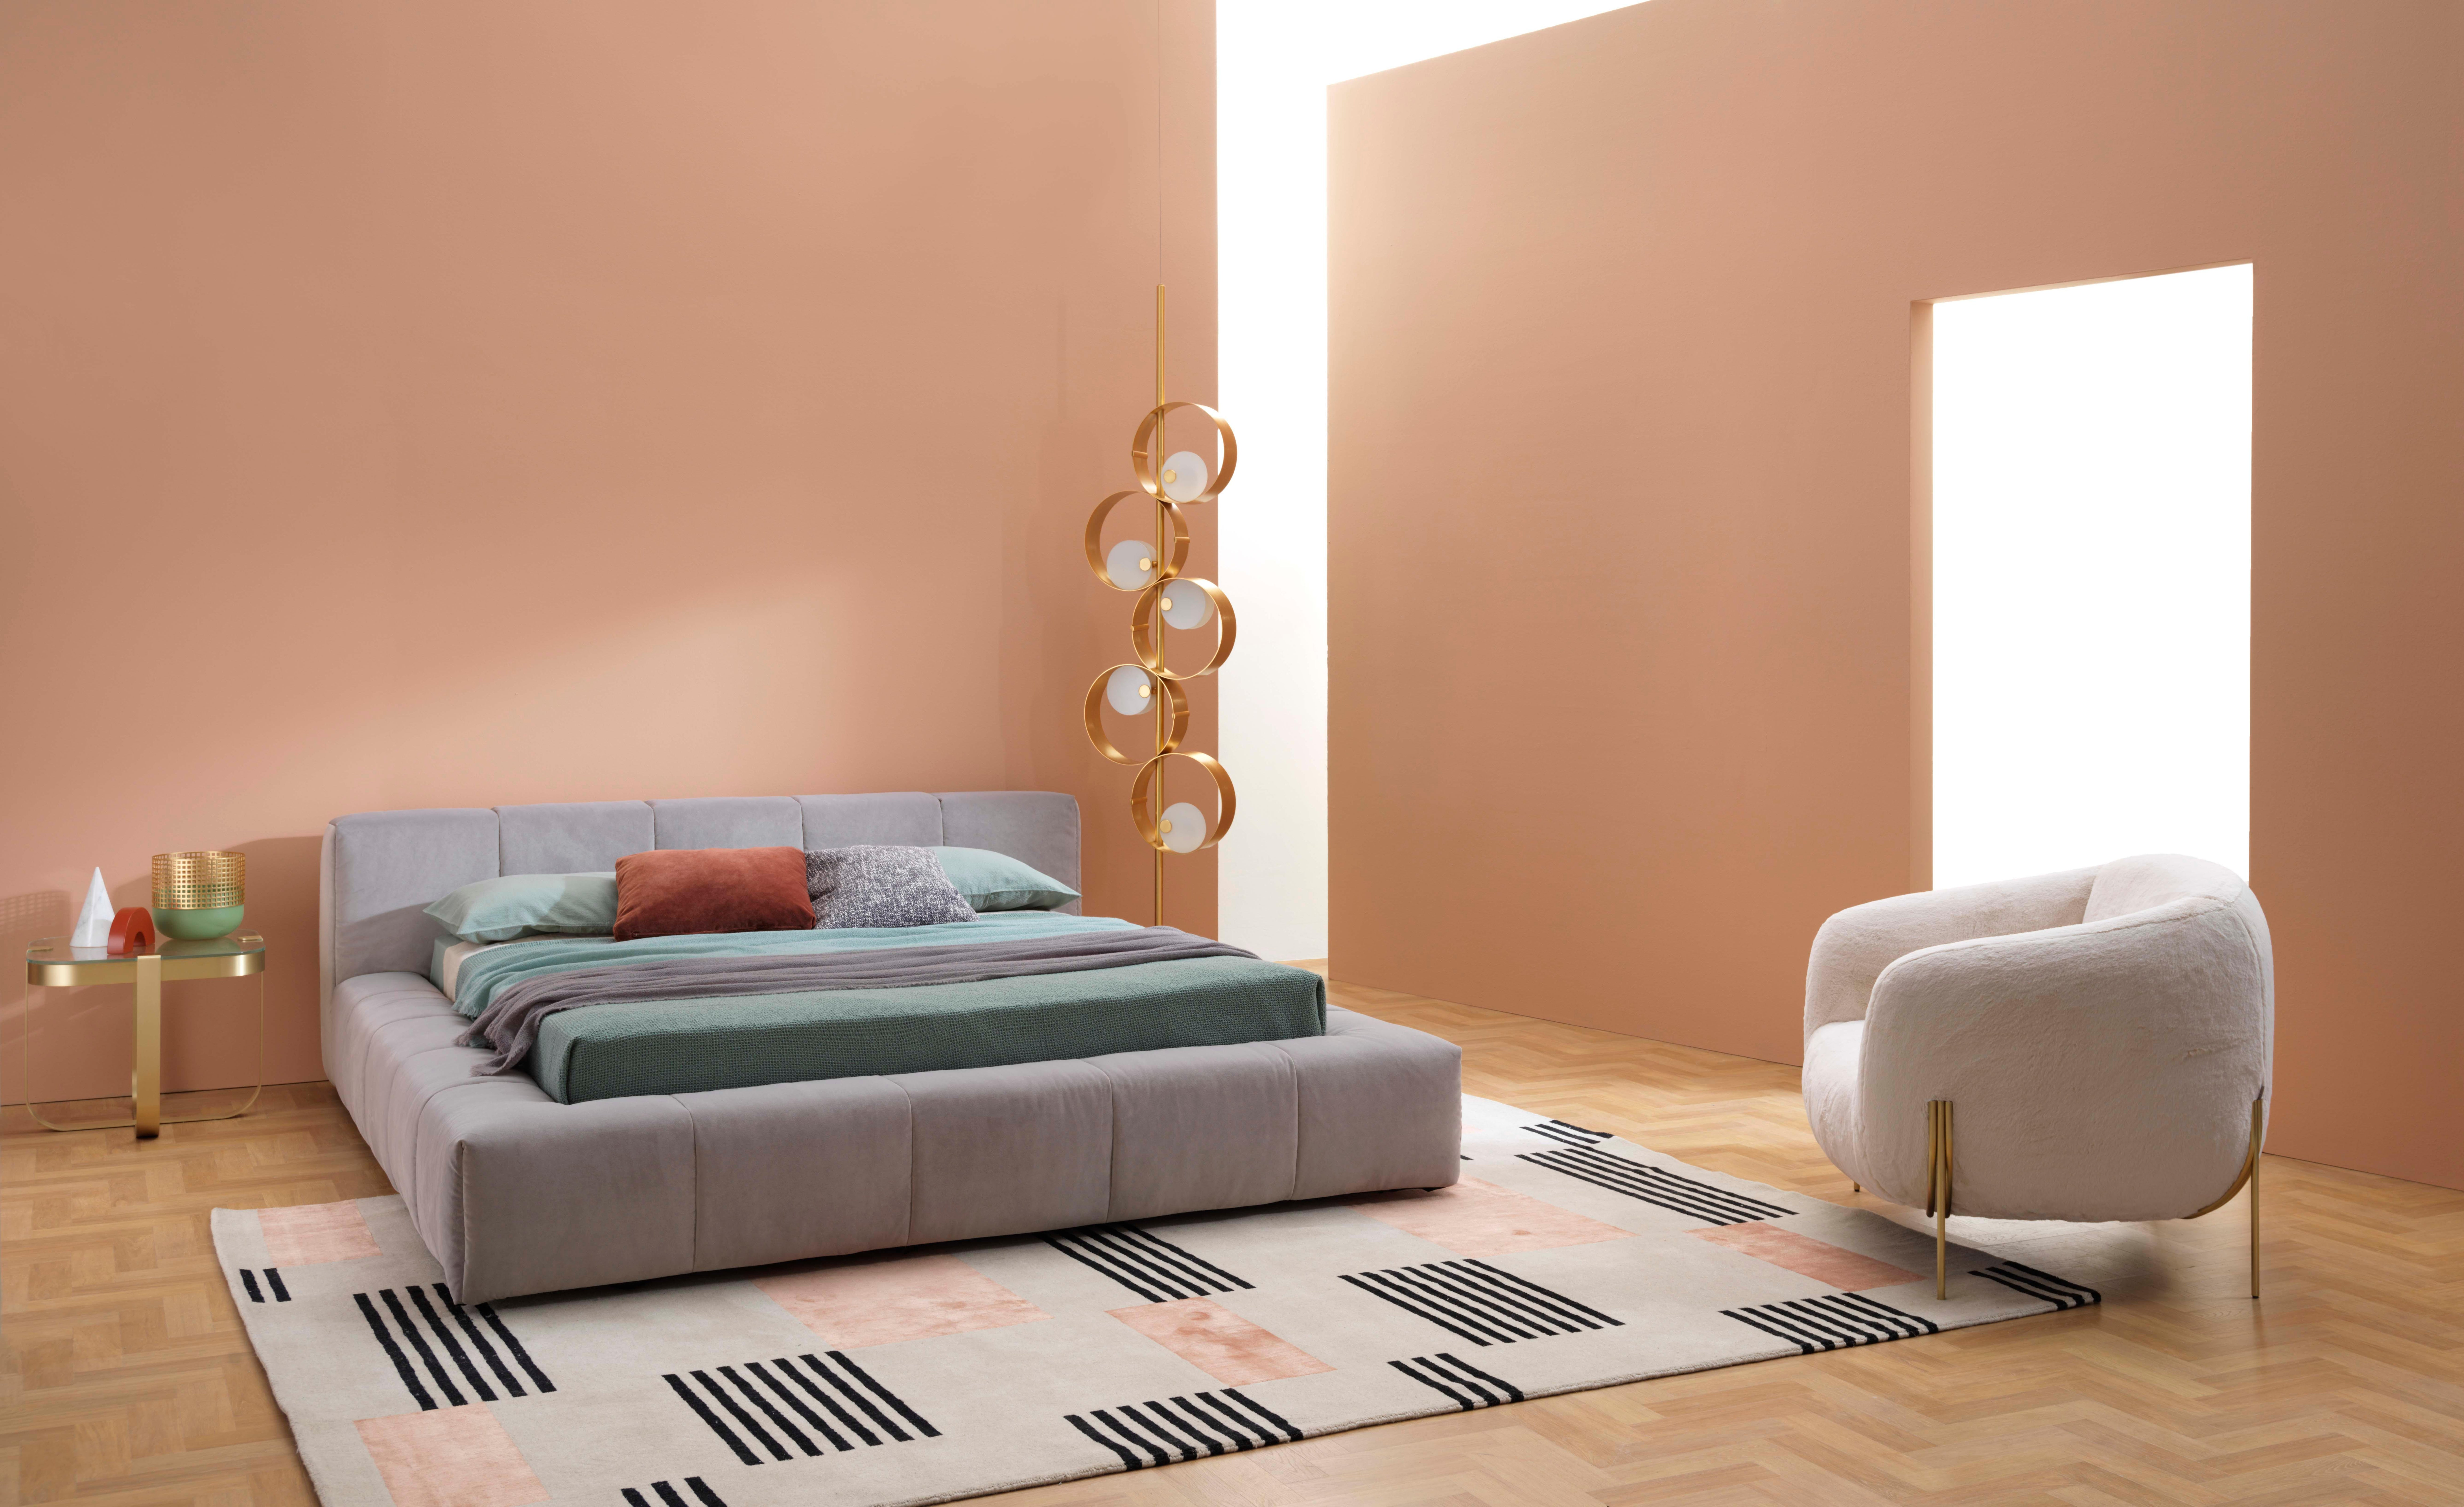 Pixel Box Large is the most voluminous option in the Pixel bed collection, completely enclosed by the soft and ample bed frame. Pixel Box Large most evidently recalls the iconic and generous rounded shapes of Saba’s Pixel sofa. Only bed without bed